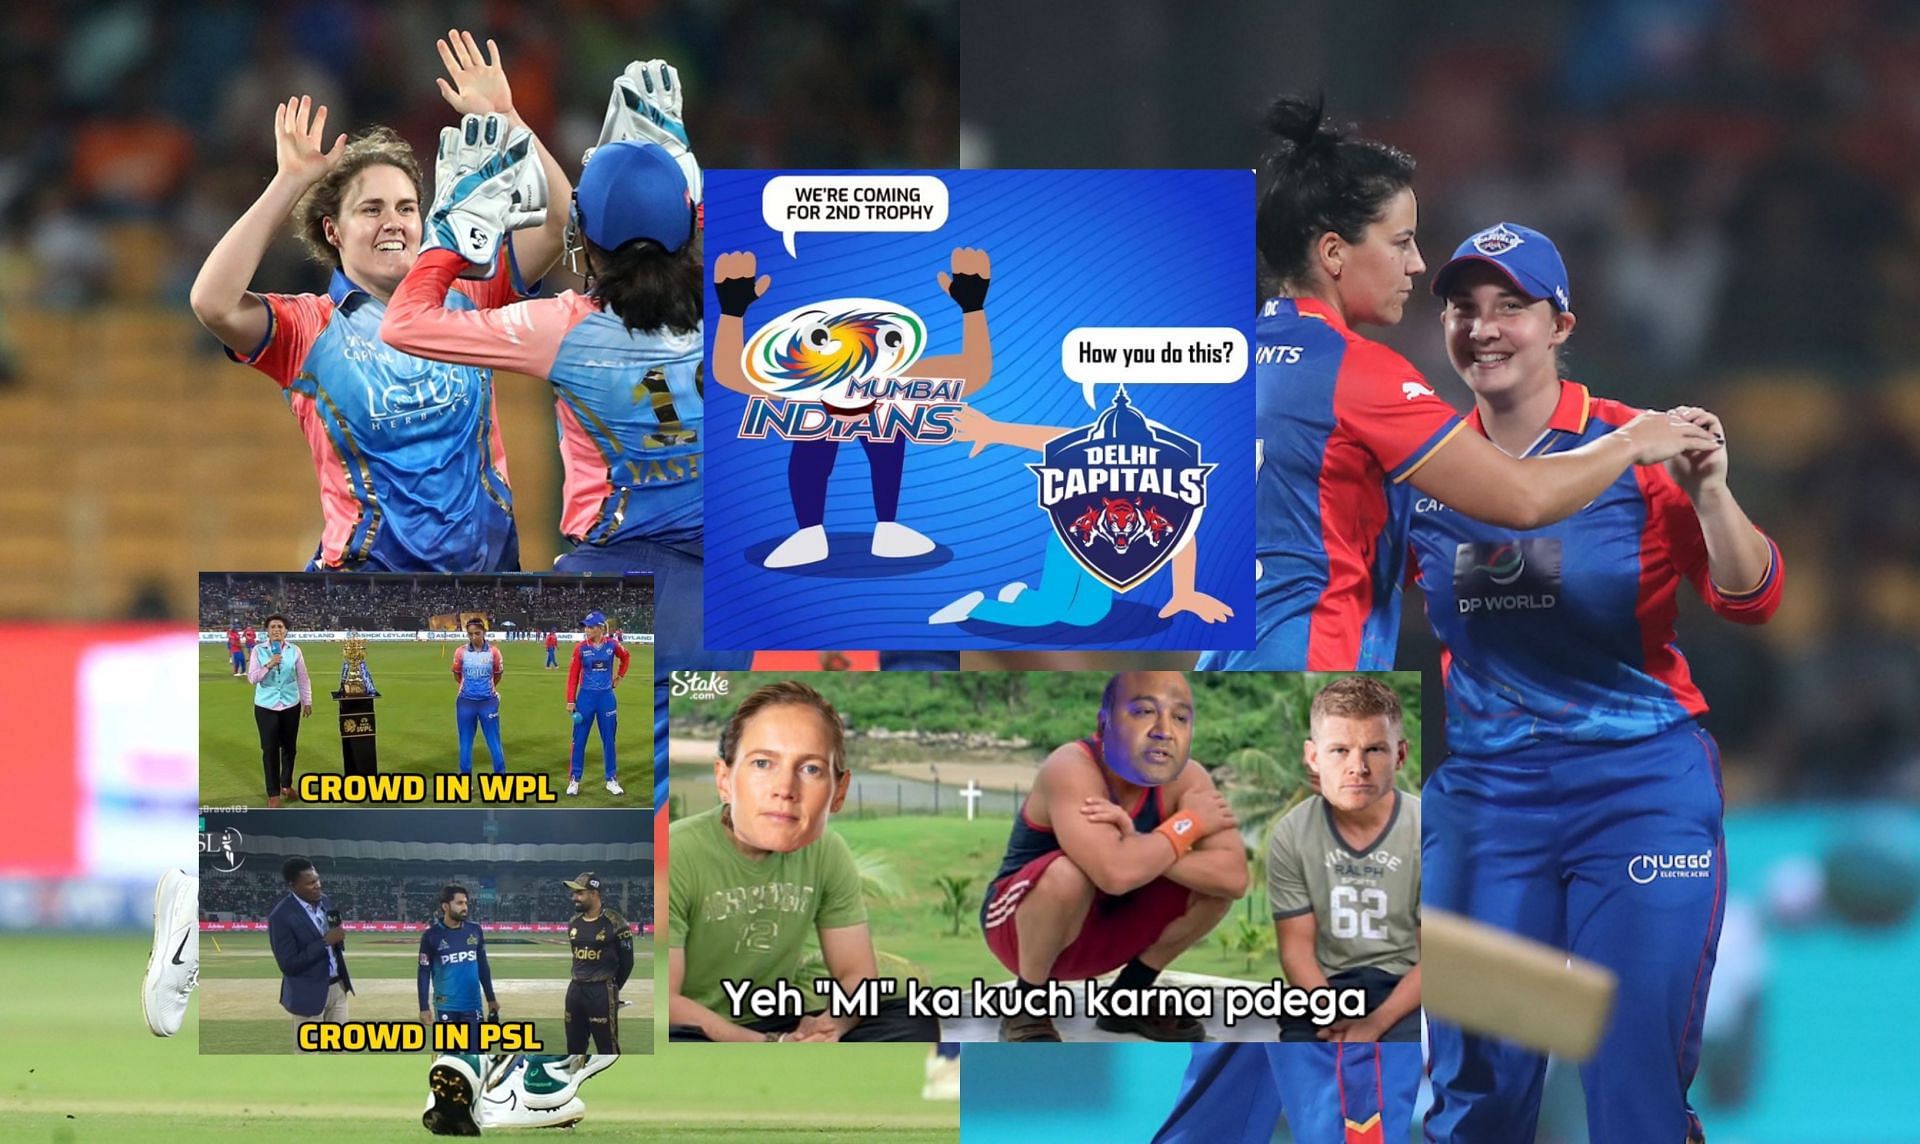 Top 10 funny memes from the latest WPL match.